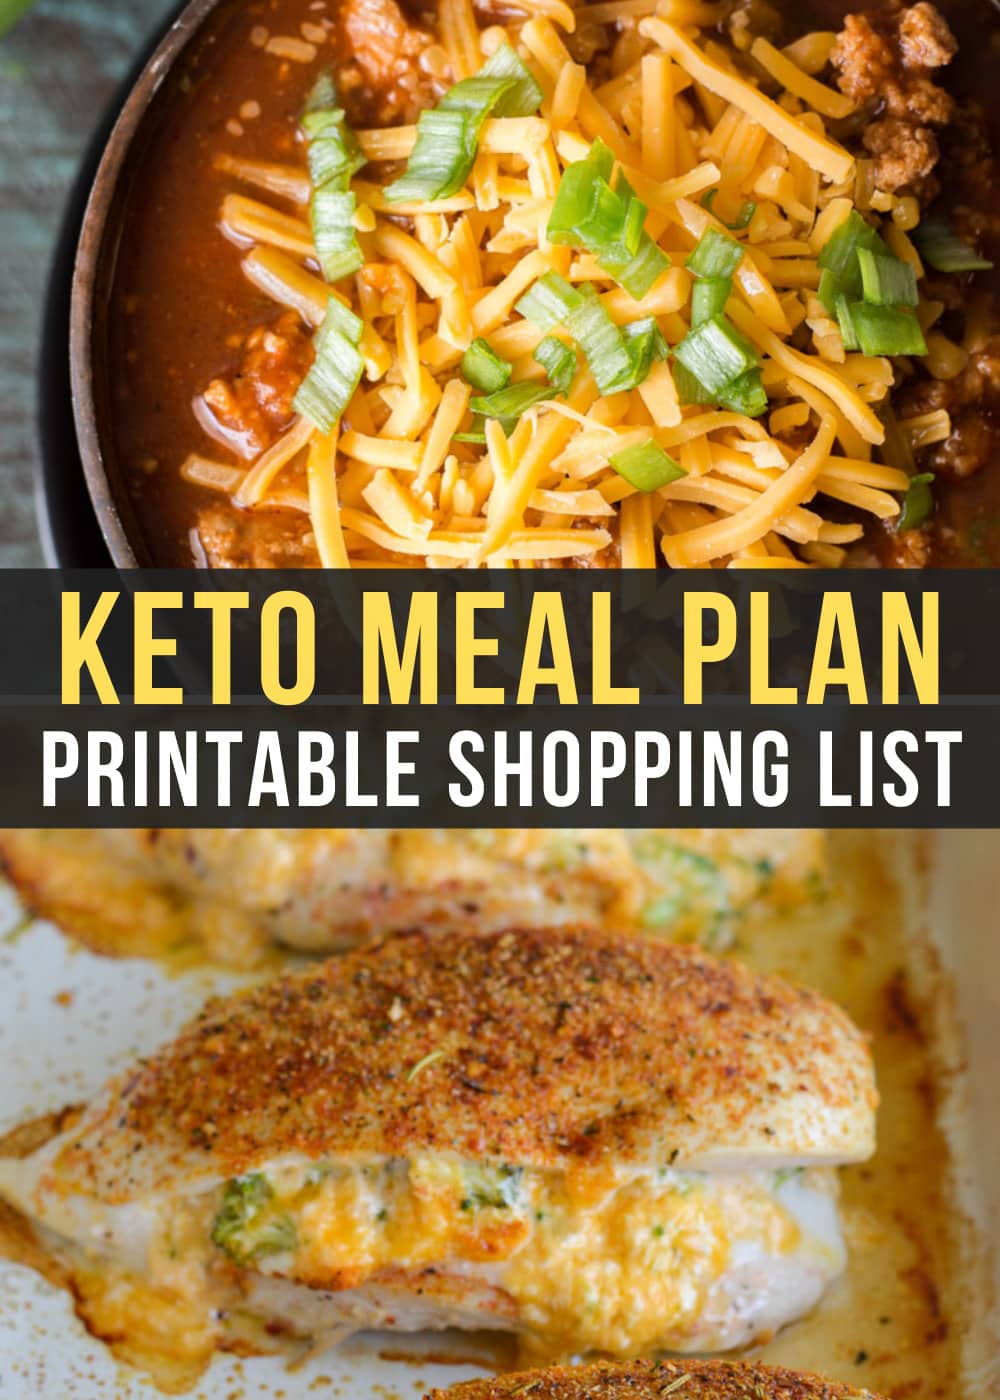 This week's Easy Keto Meal Plan has all you need for next week's dinner plans! A printable shopping list, meal prep tips, and side dish recommendations are included for an easy keto week!